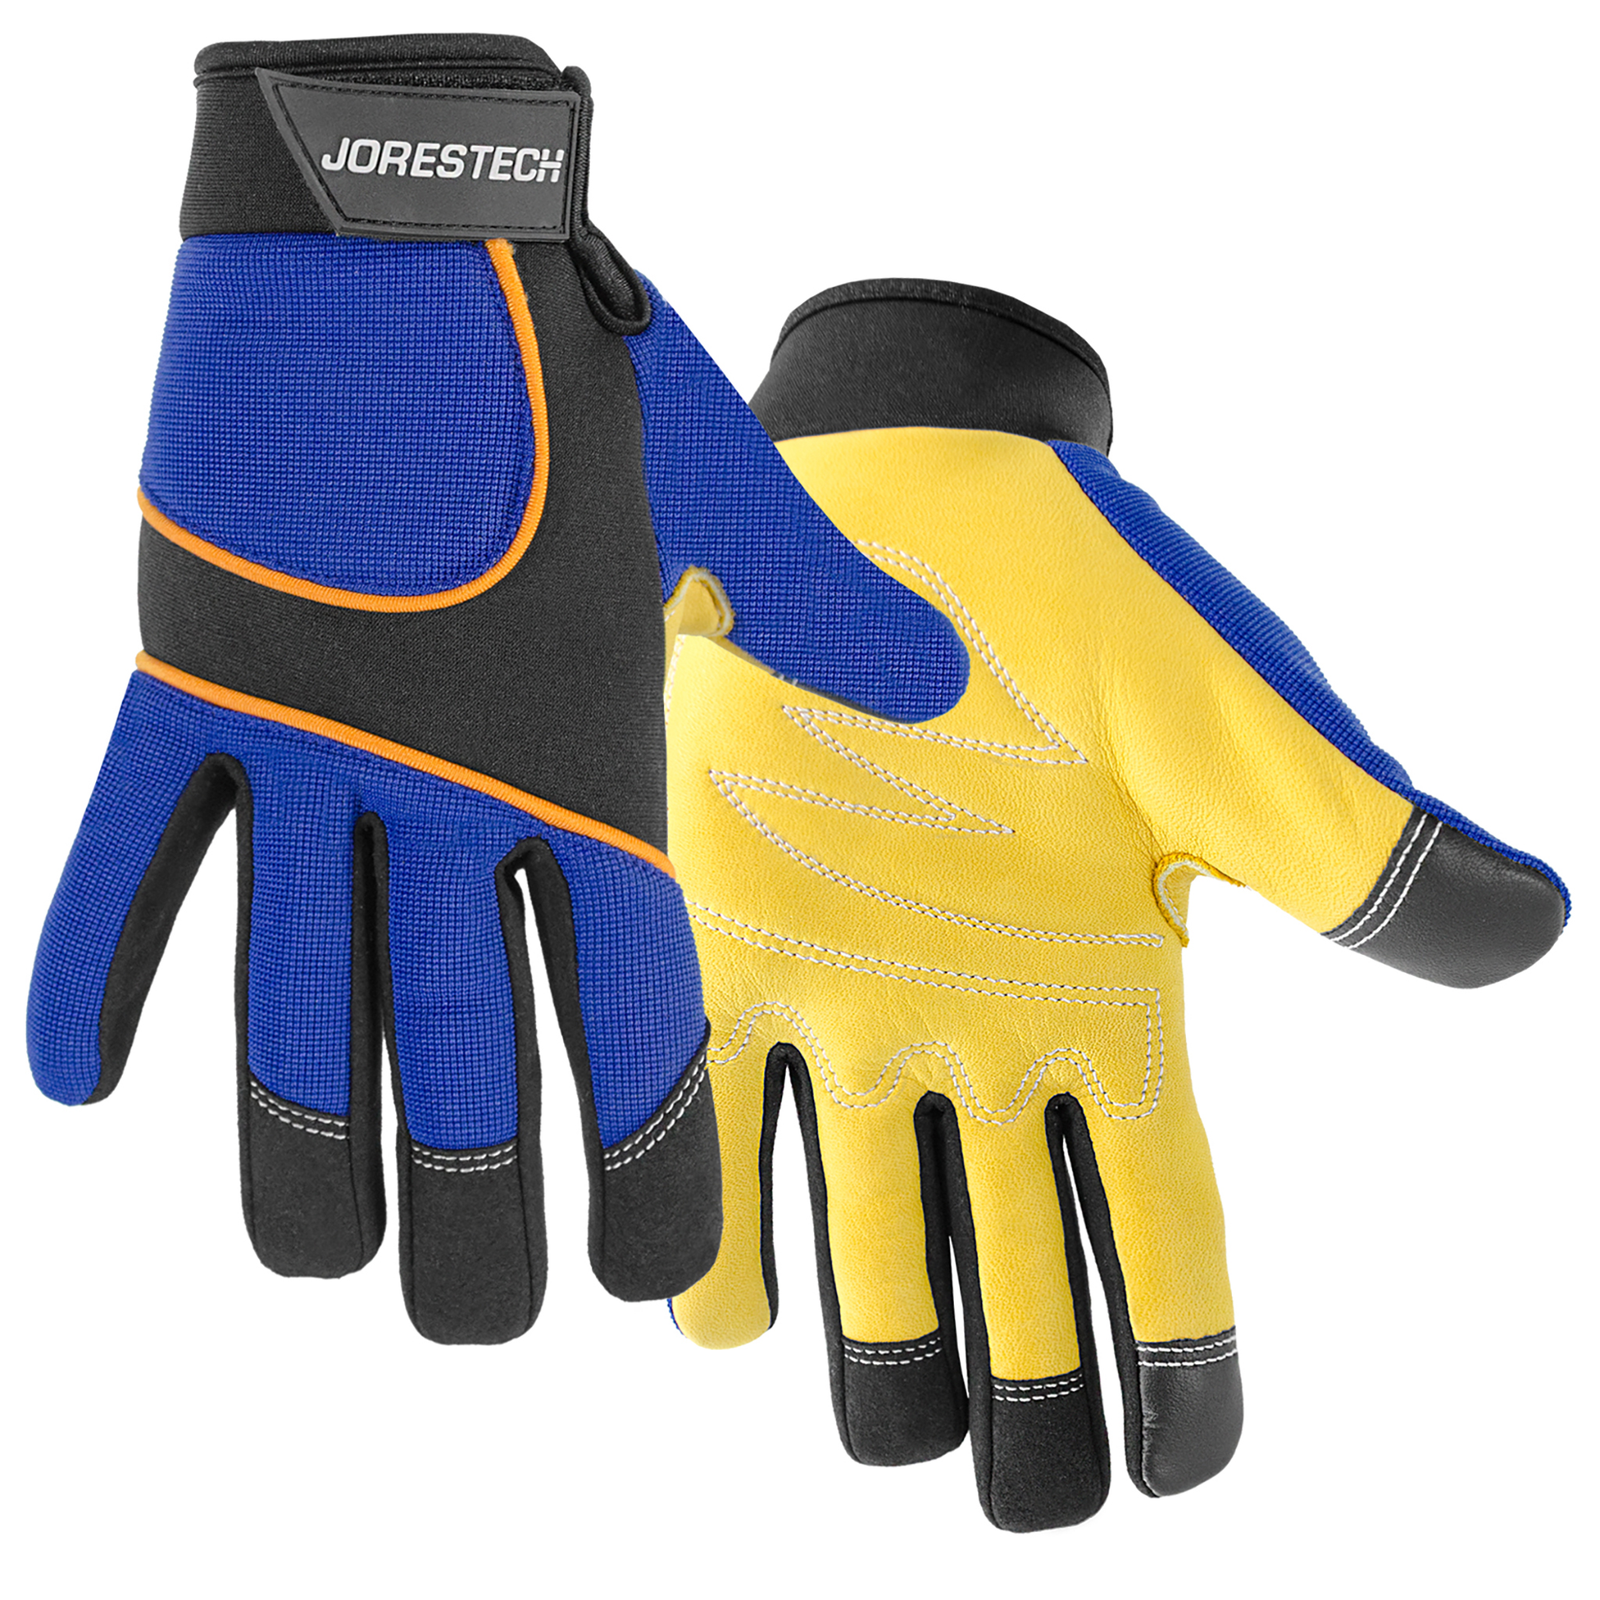 1 set of blue touchscreen JORESTECH safety work gloves with leather yellow palms 